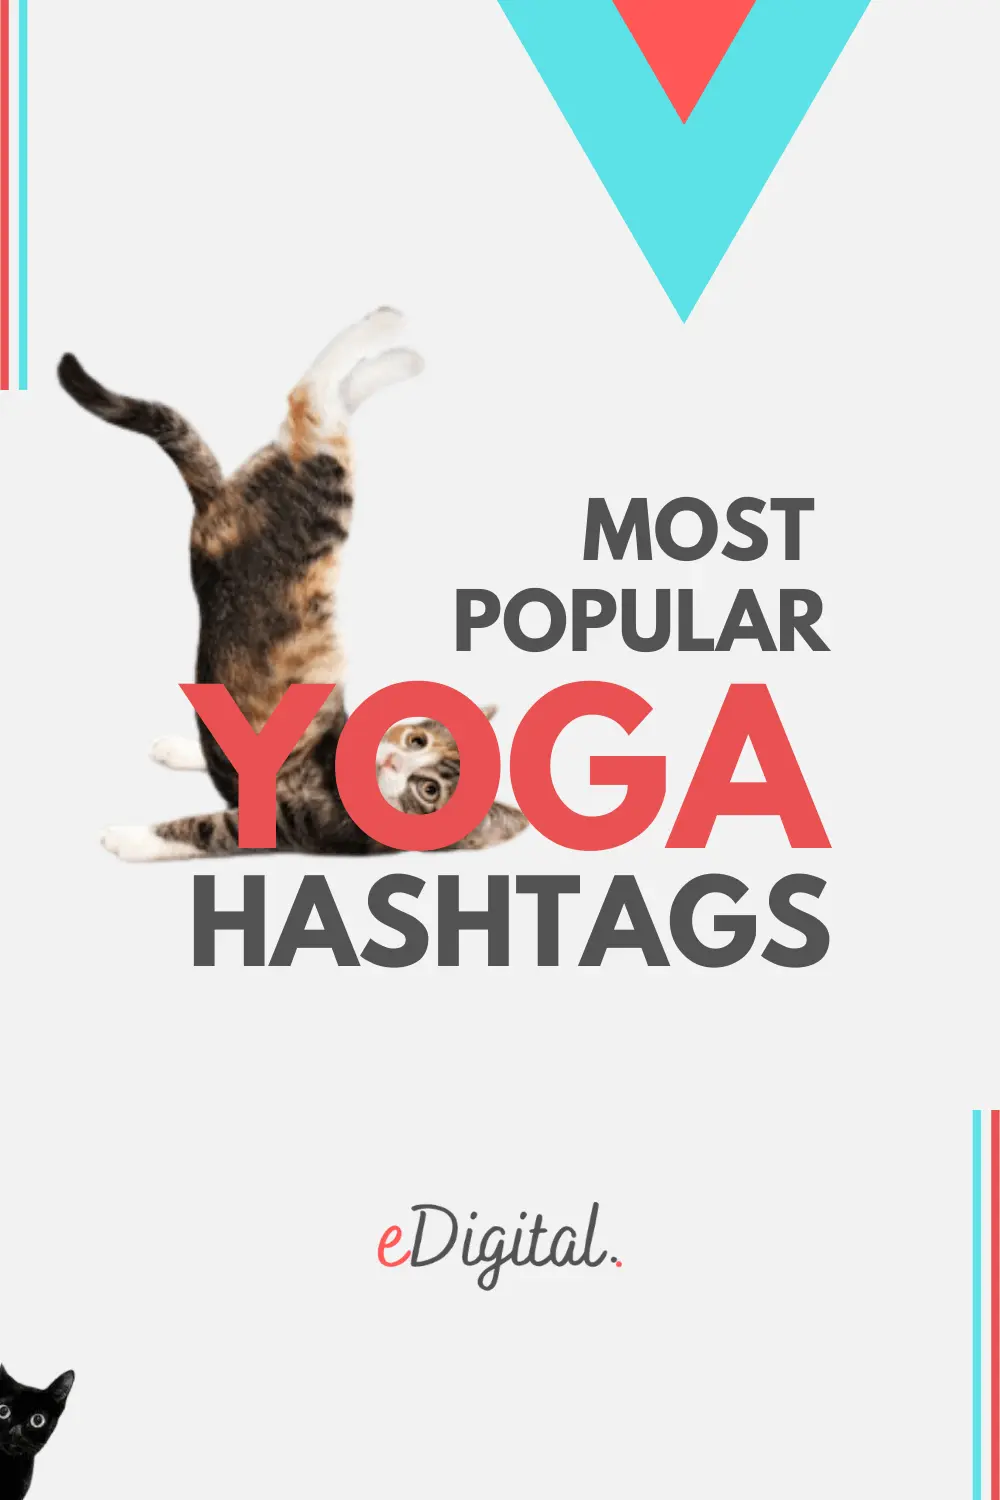 best yoga hashtags - What hashtag gets the most likes